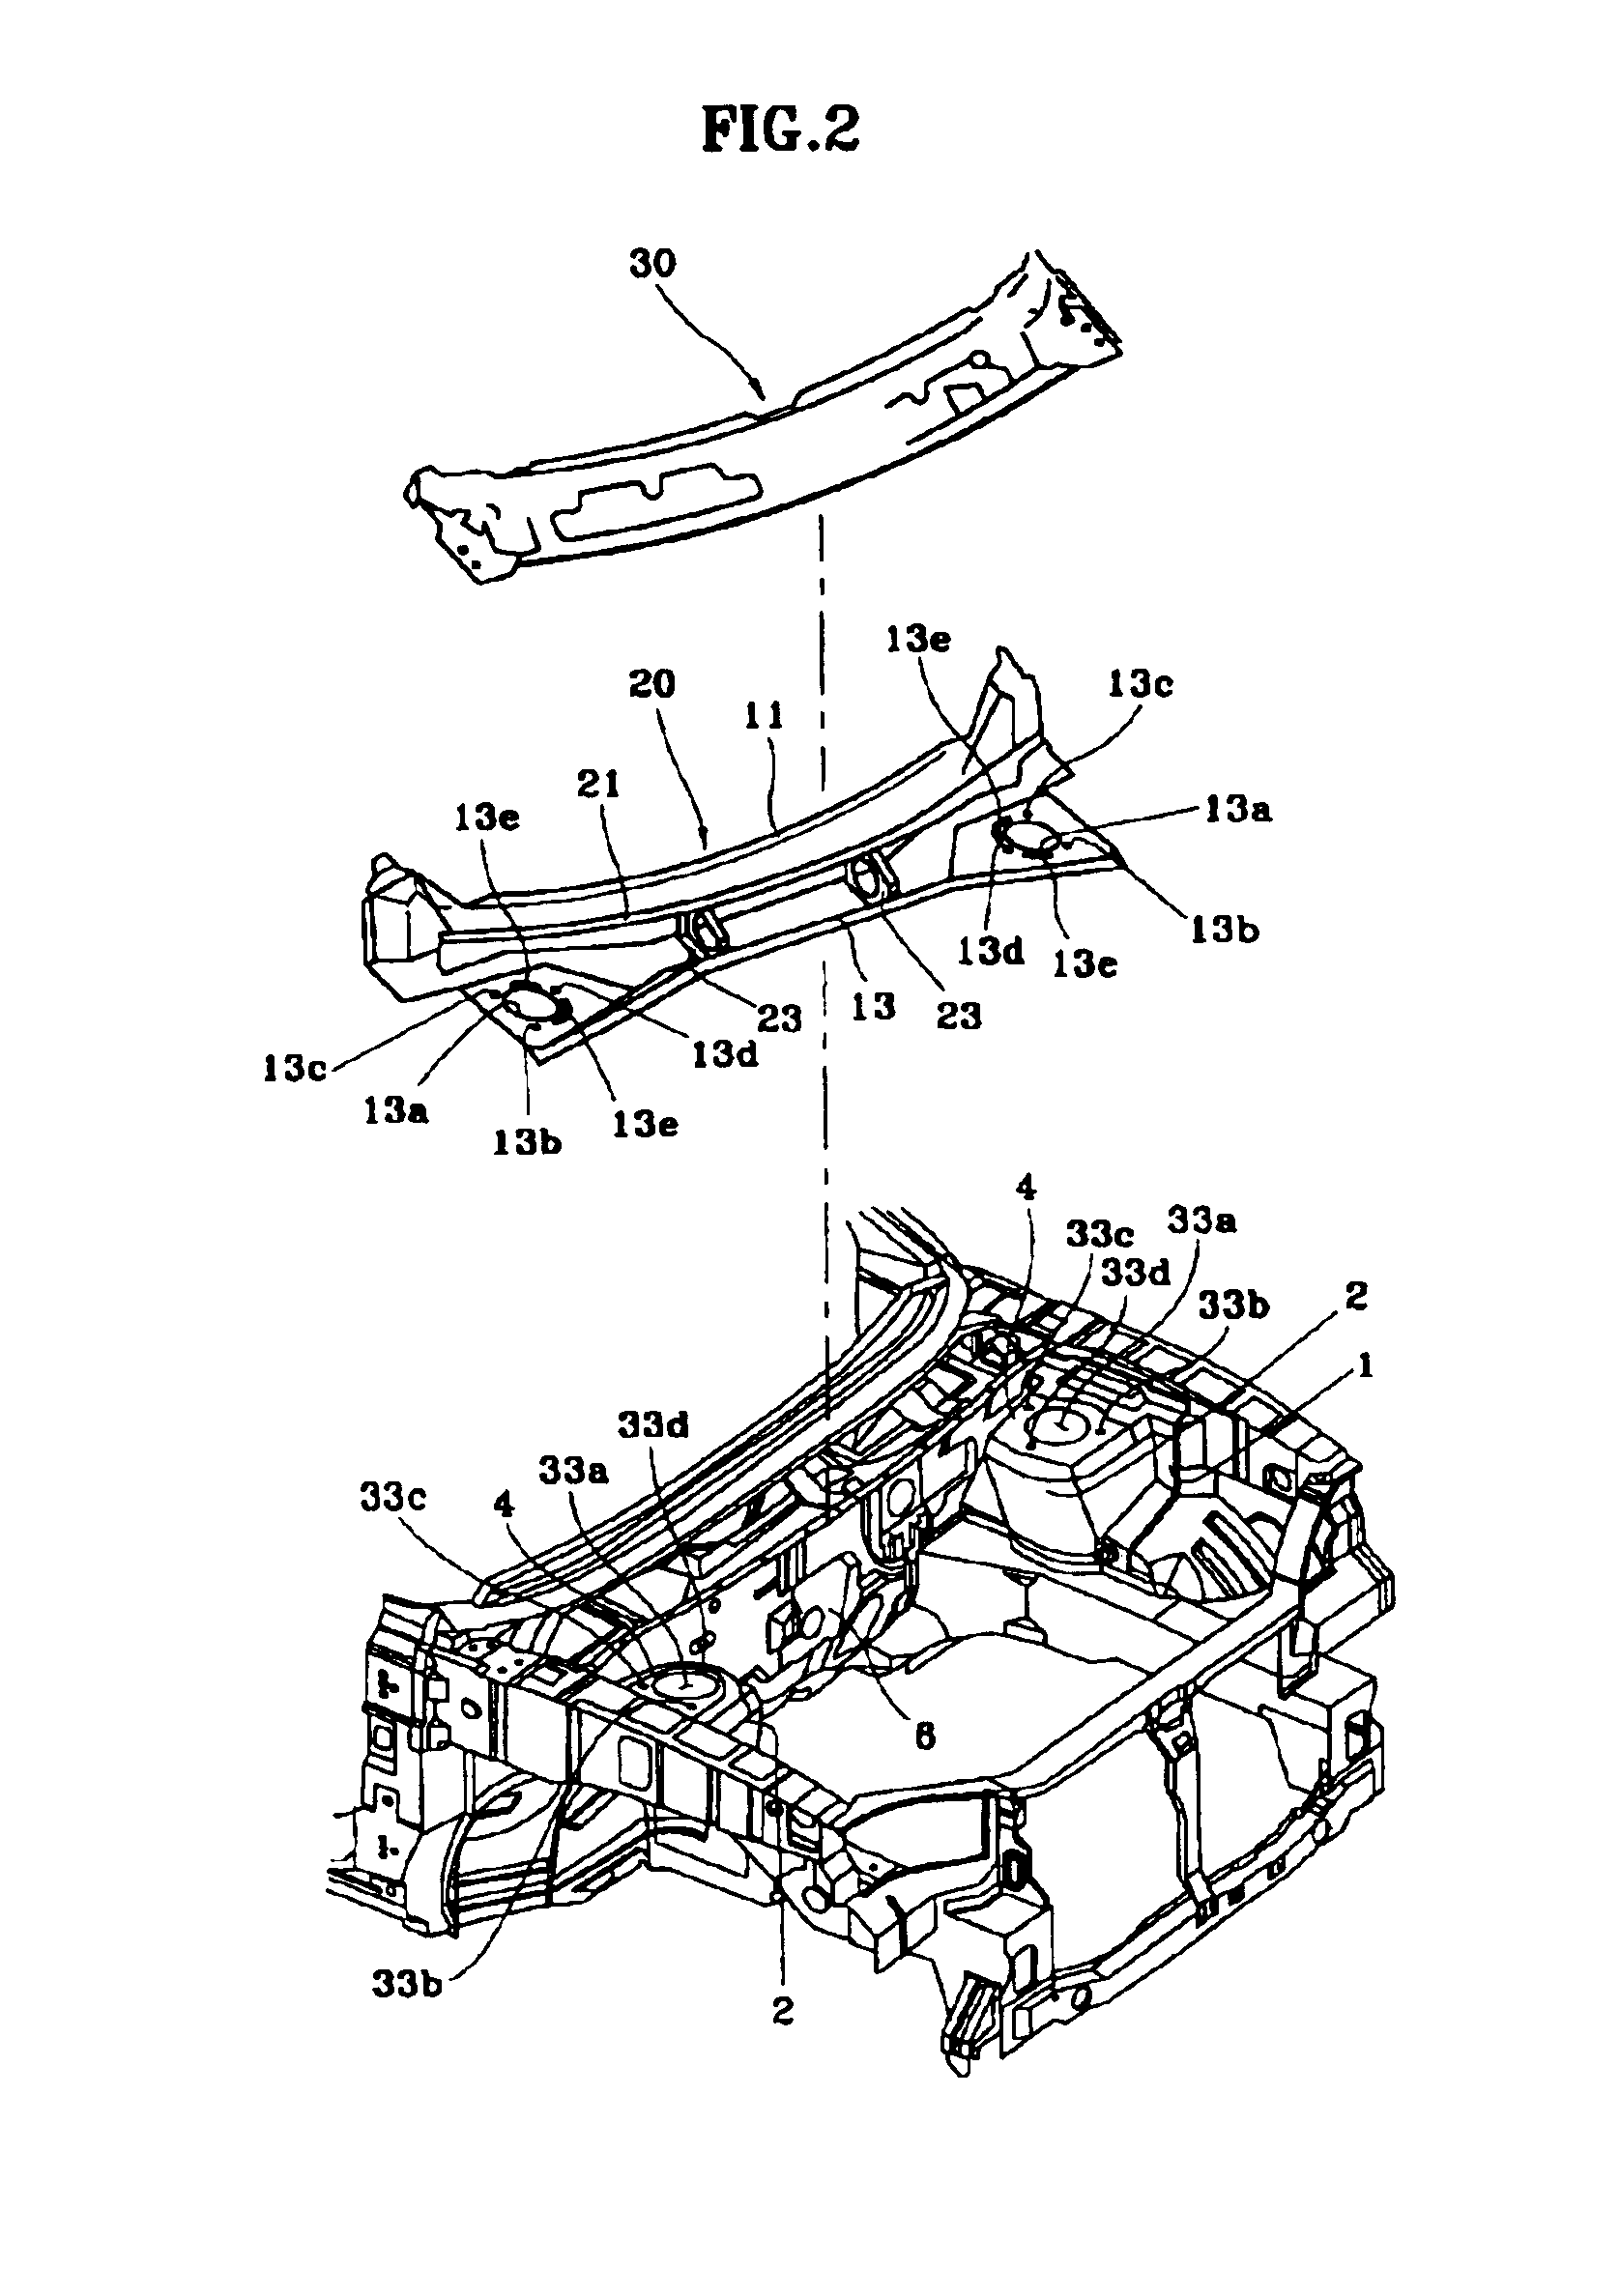 Upper mounting part structure of front strut assembly